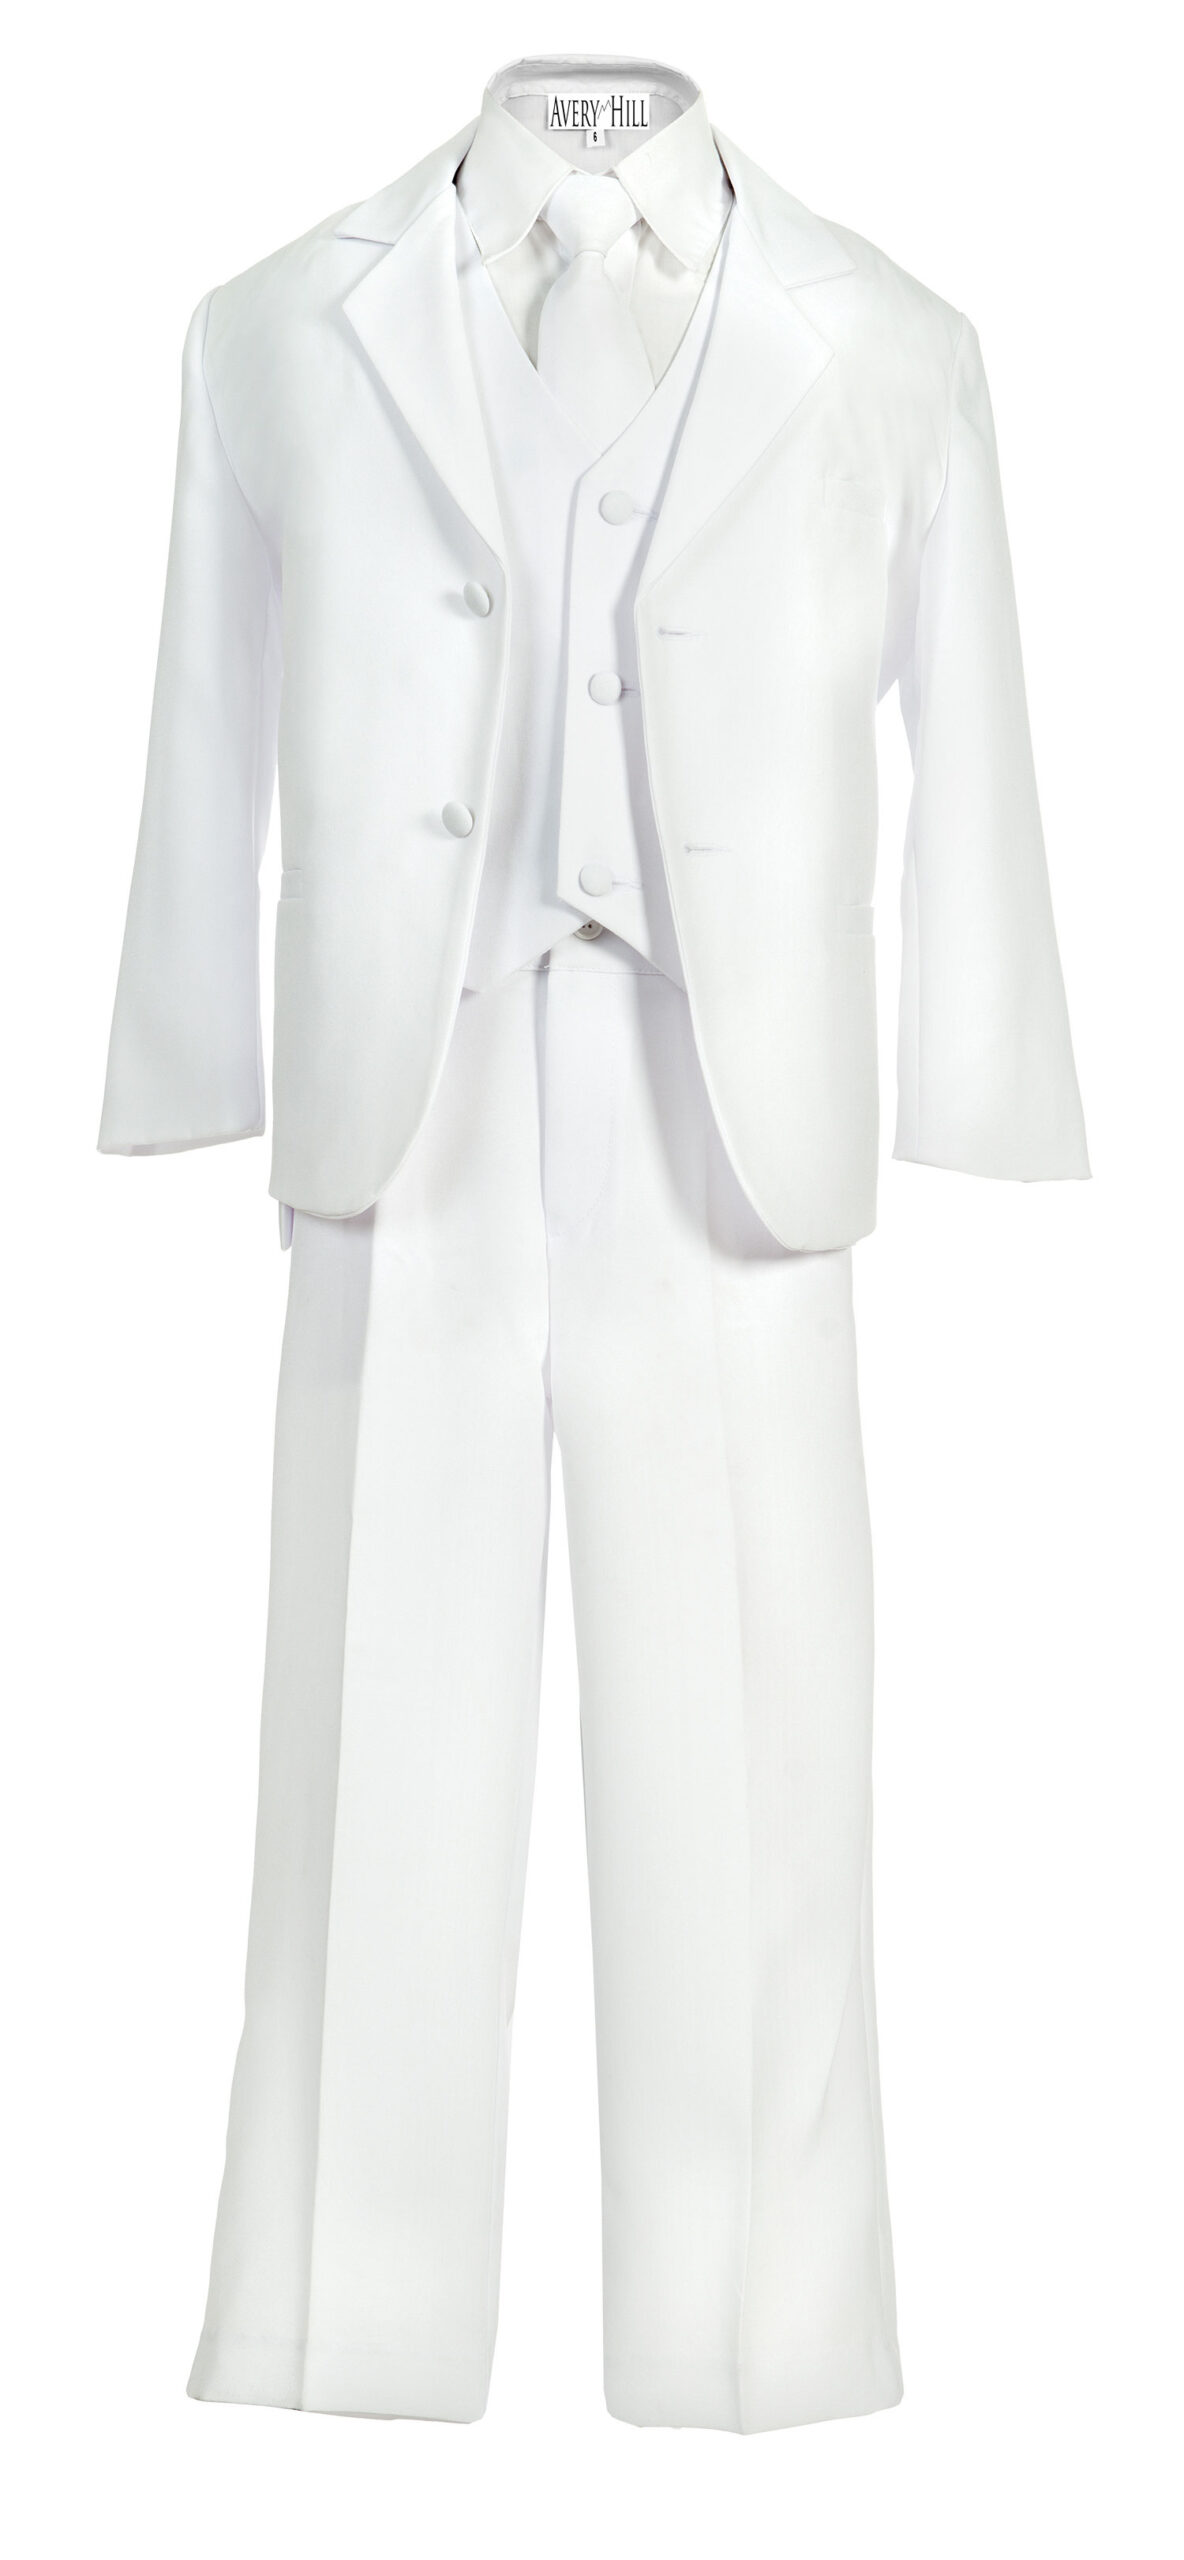 Avery Hill Boys Formal 5 Piece Suit with Shirt and Vest White - 6